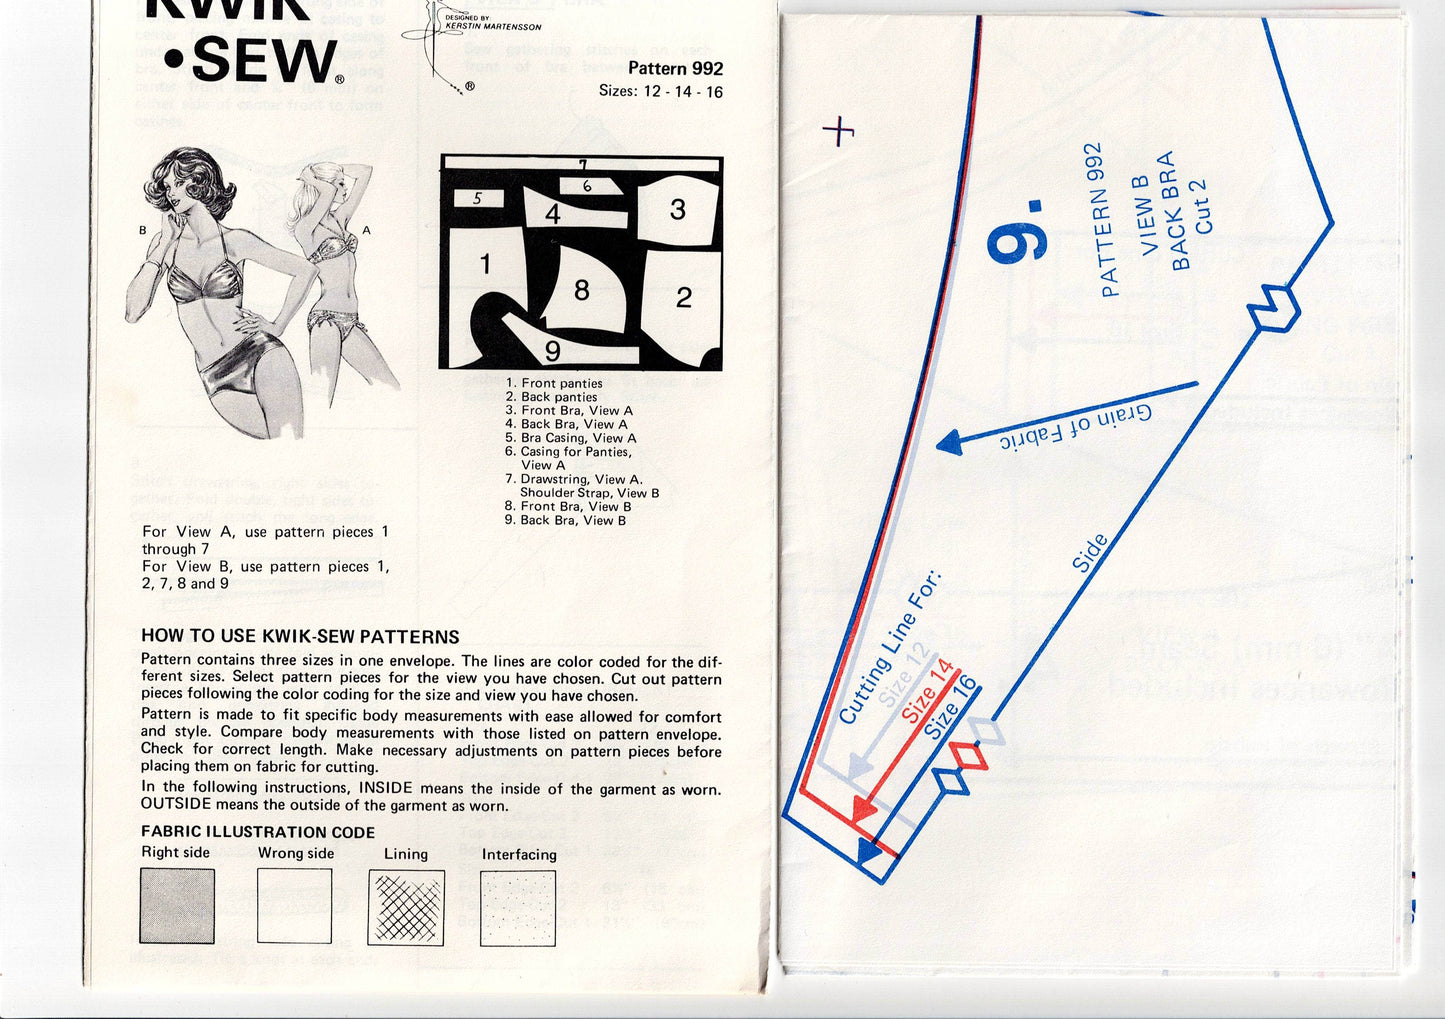 Kwik Sew 992 Womens Stretch Hipster Bikini 1970s Vintage Sewing Pattern Bust 37 - 40 inches UNCUT Factory Folded